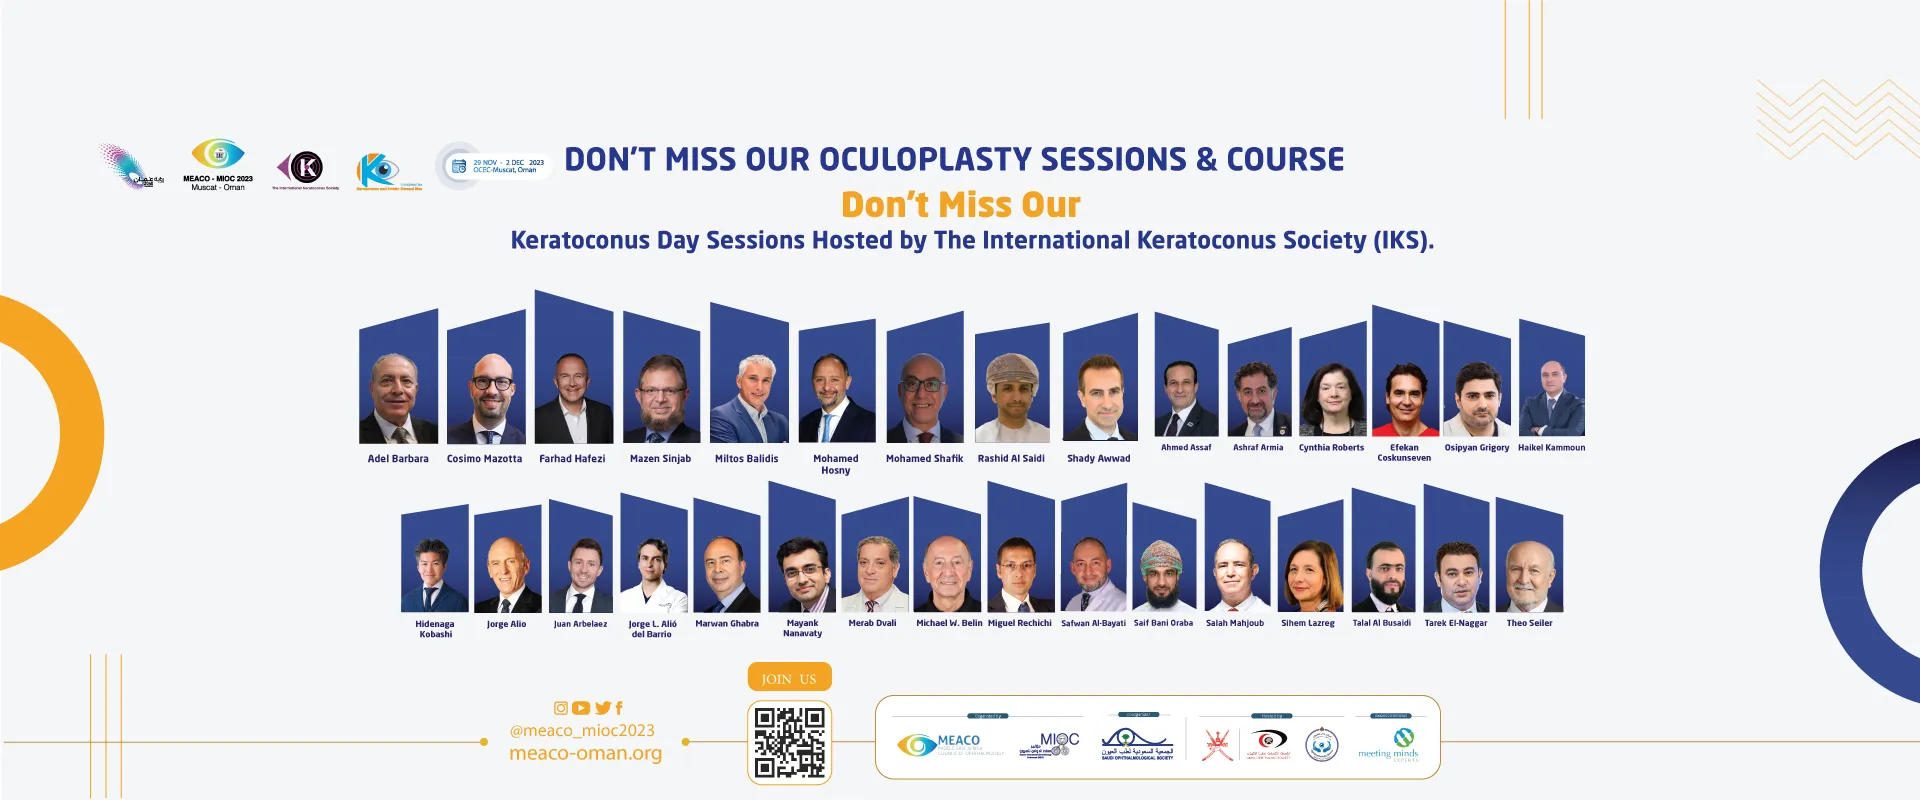 DON'T MISS OUR OCULOPLASTY SESSIONS & COURSE
				Don't Miss Our Keratoconus Day Sessions Hosted by The International Keratoconus Society (IKS